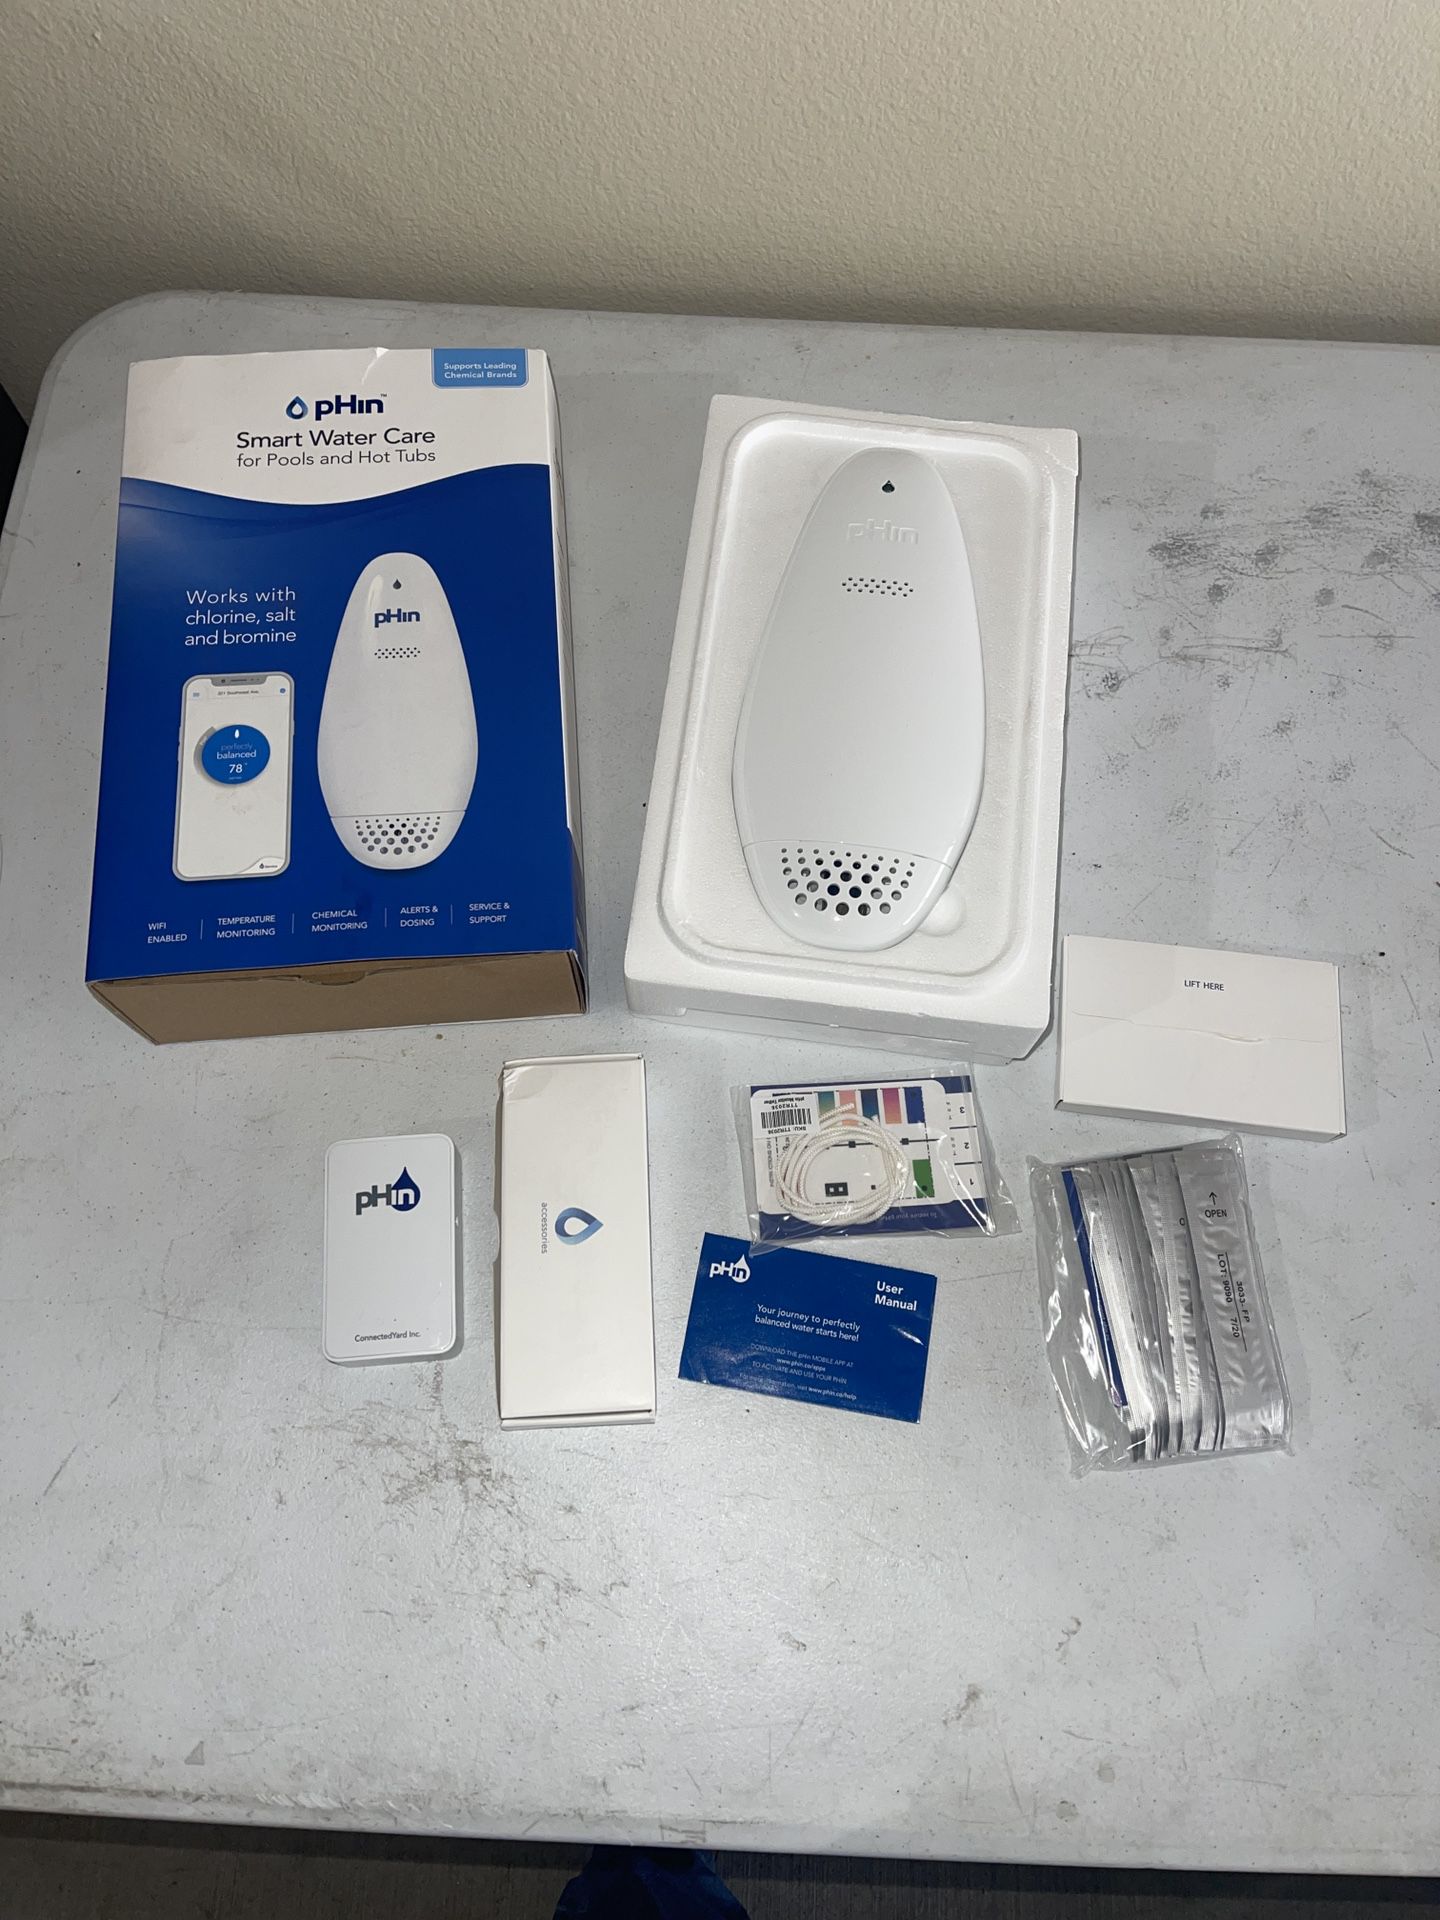 pHin Smart Water Care Monitor Pools, Hot Tubs, Spa model number CY-PM1510-A1 👀🔥